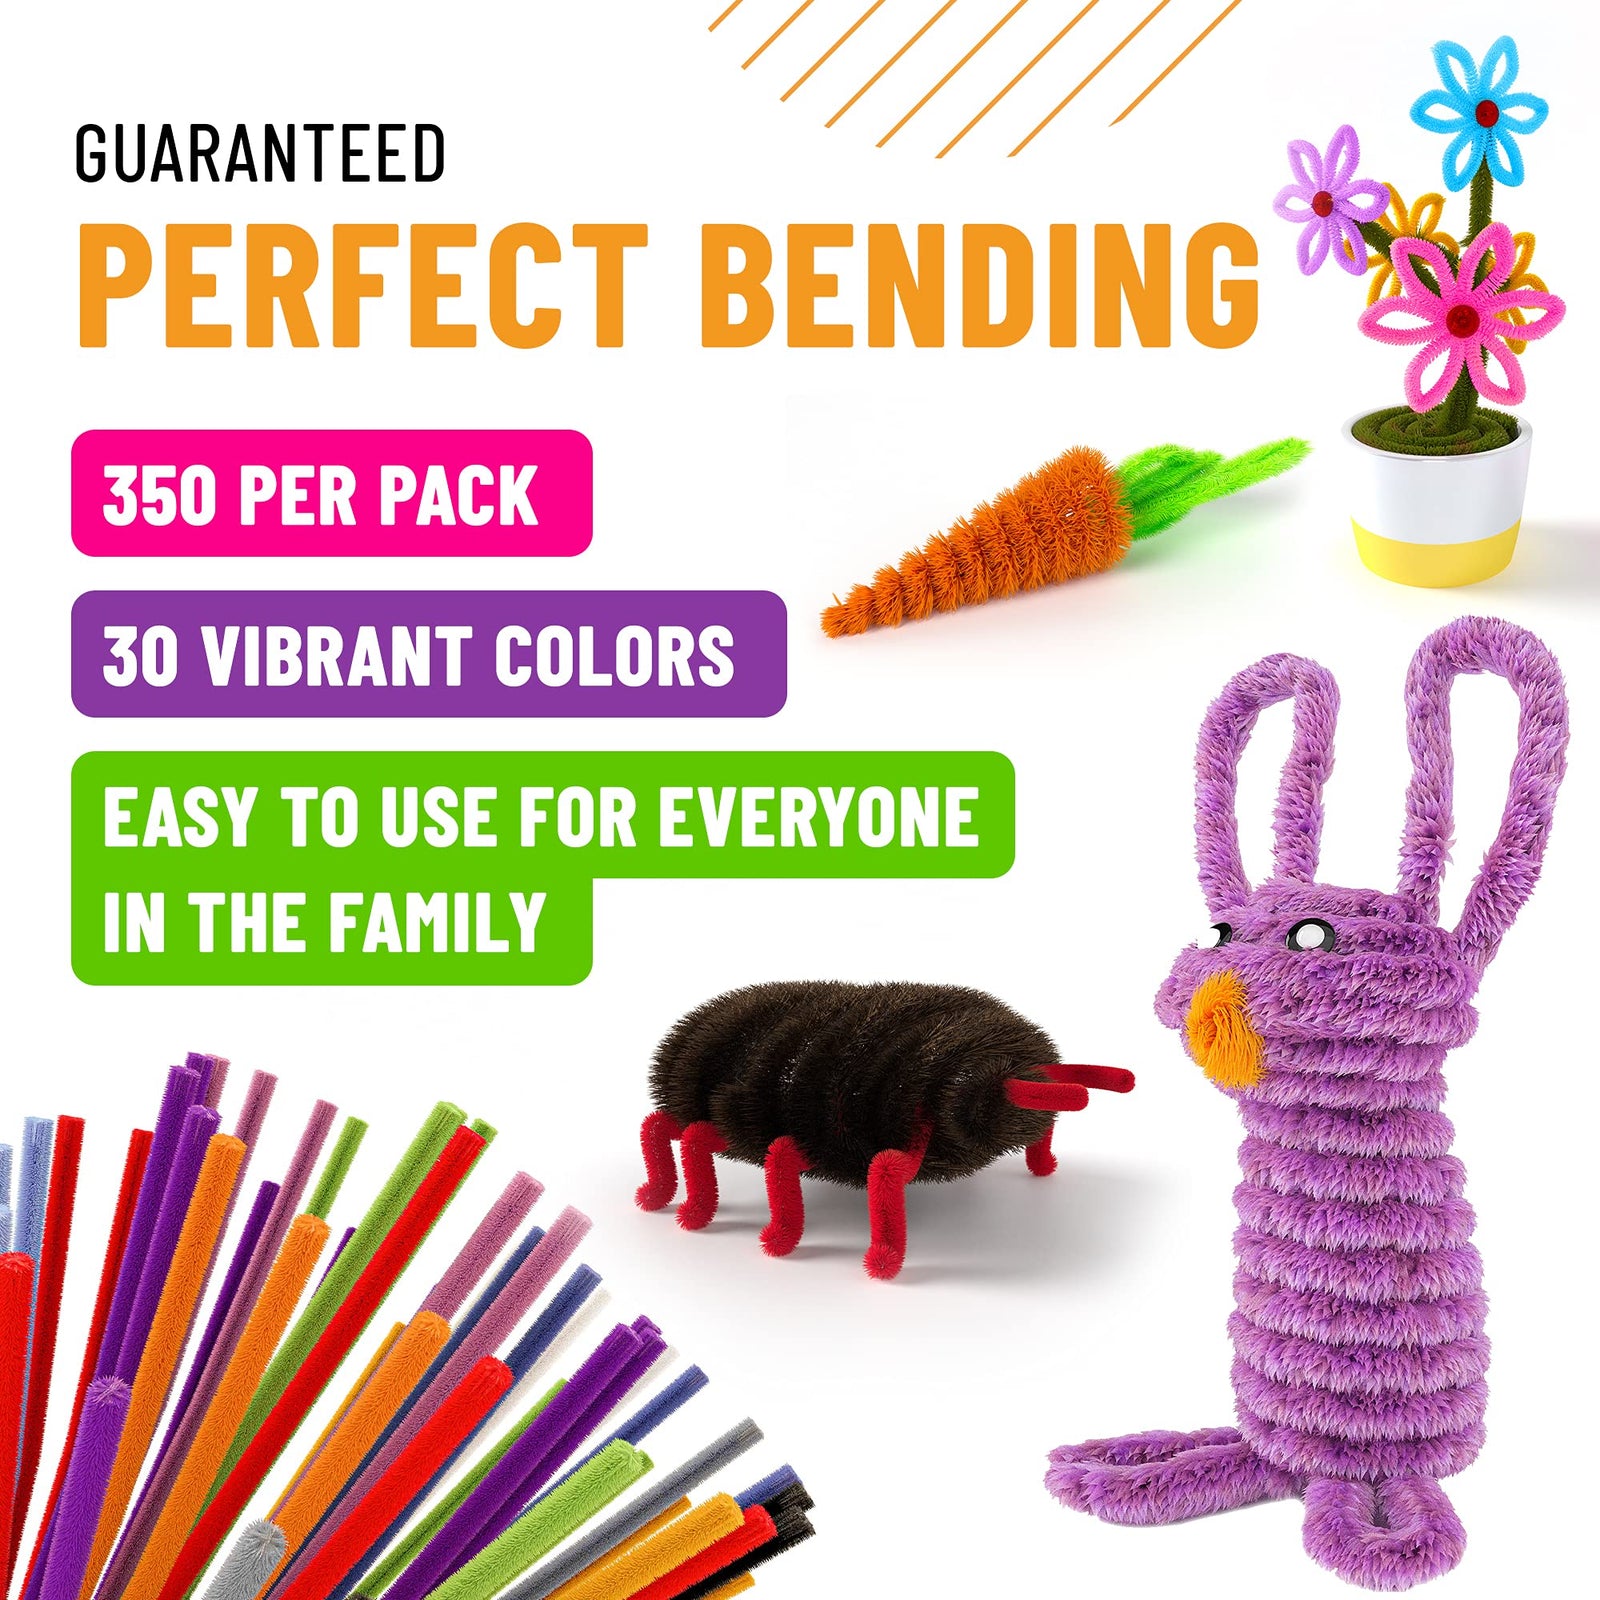 Home Pro Shop 350 Pieces Pipe Cleaners for Craft Supplies - Soft Bristle, Flexible & Durable Pipe Cleaner for Crafts, Fun Creative DIY Ar, & Decorations - 6mm x 12inch Chenille Stems in 30 Colors